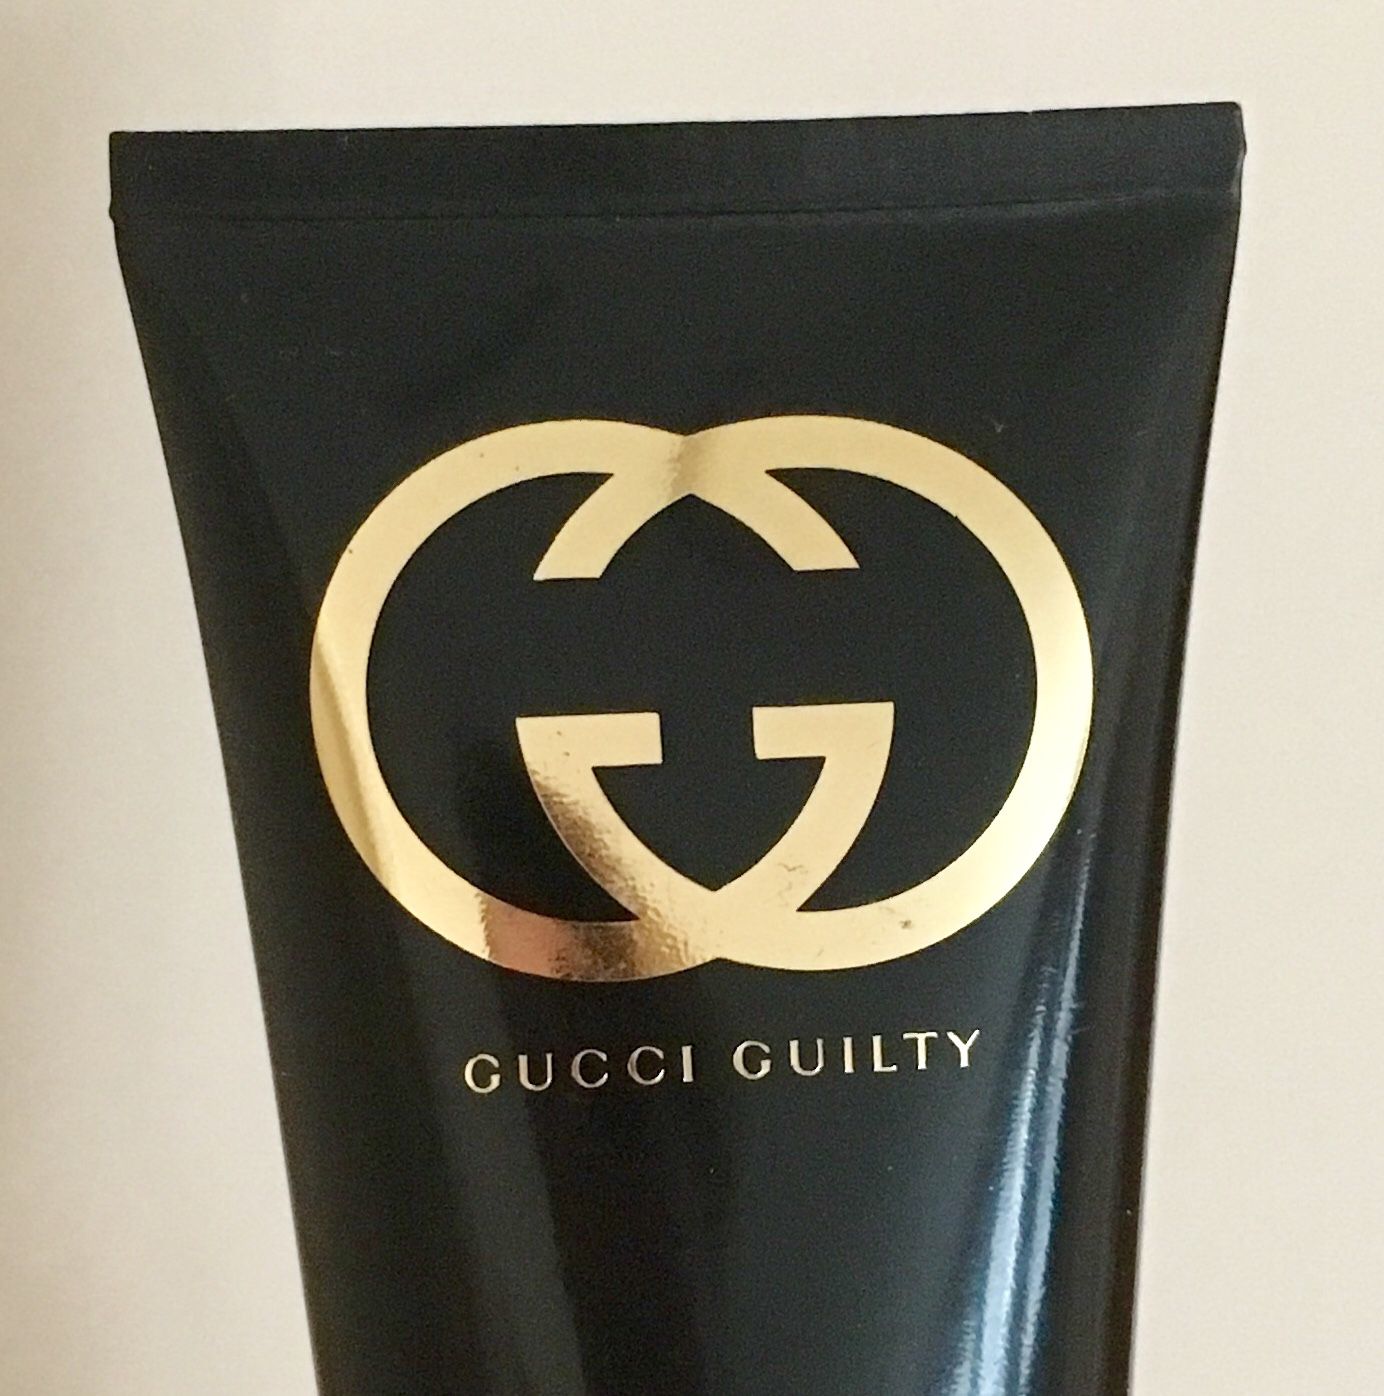 Gucci Guilty Perfumed Body Lotion